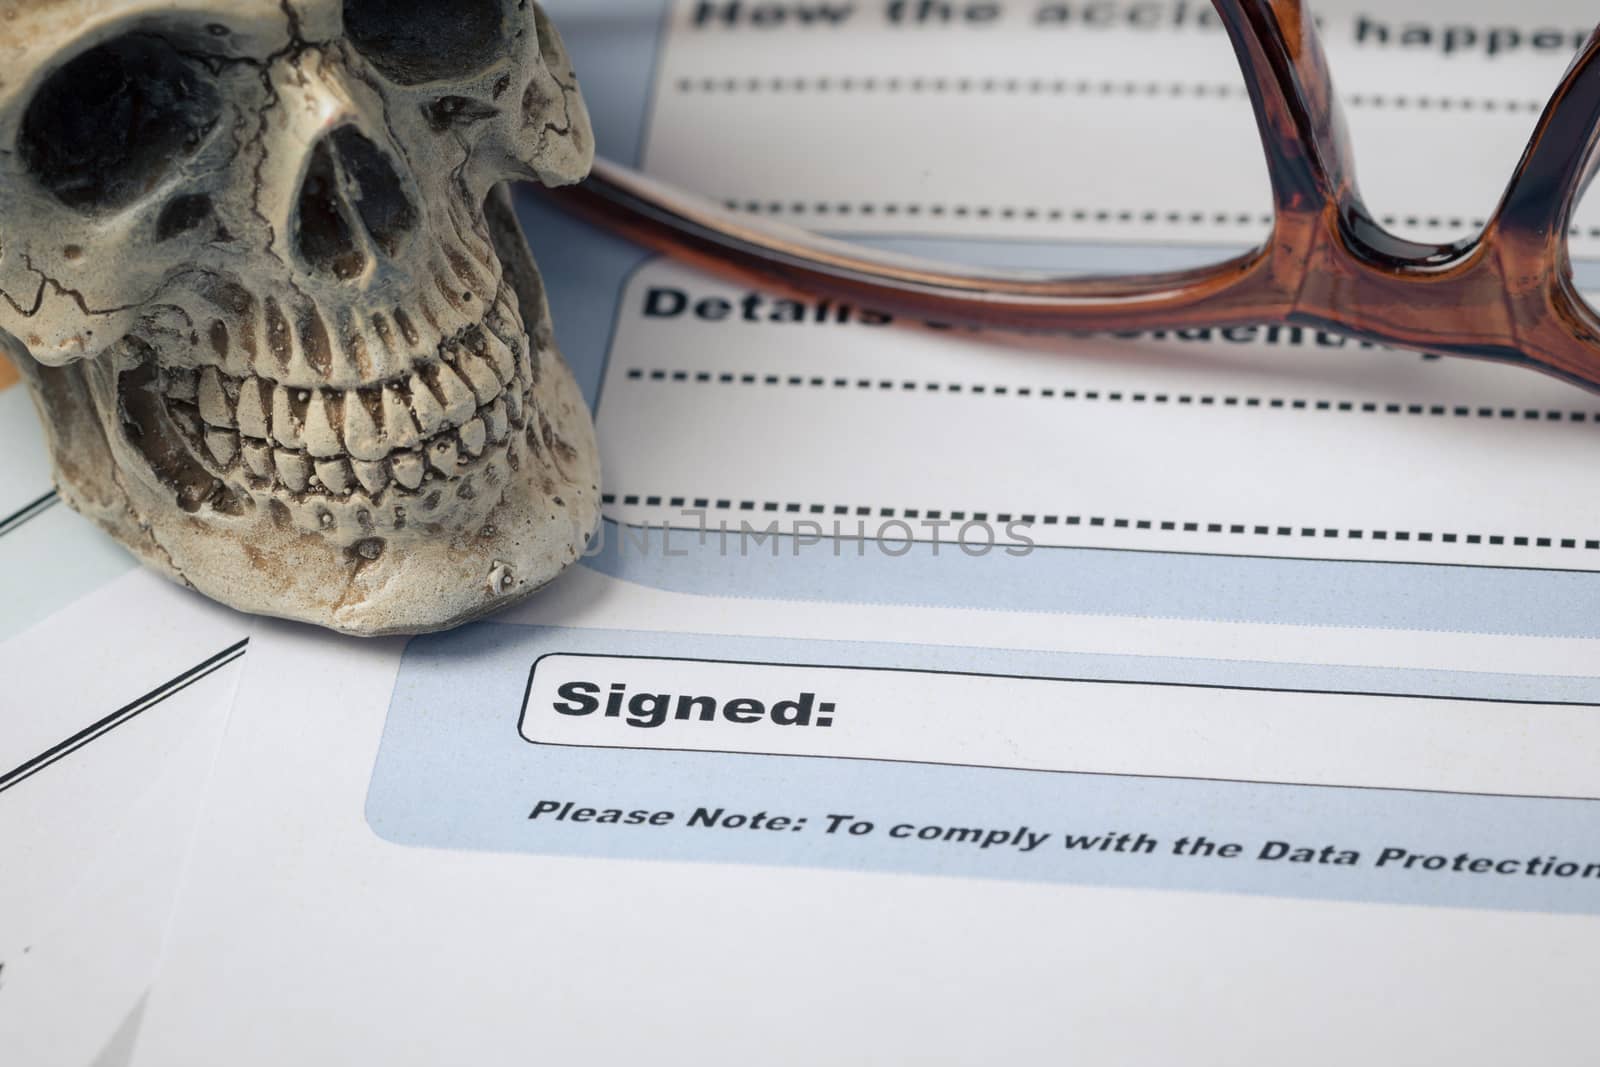 Signature field on document with pen and skull signed here; document is mock-up